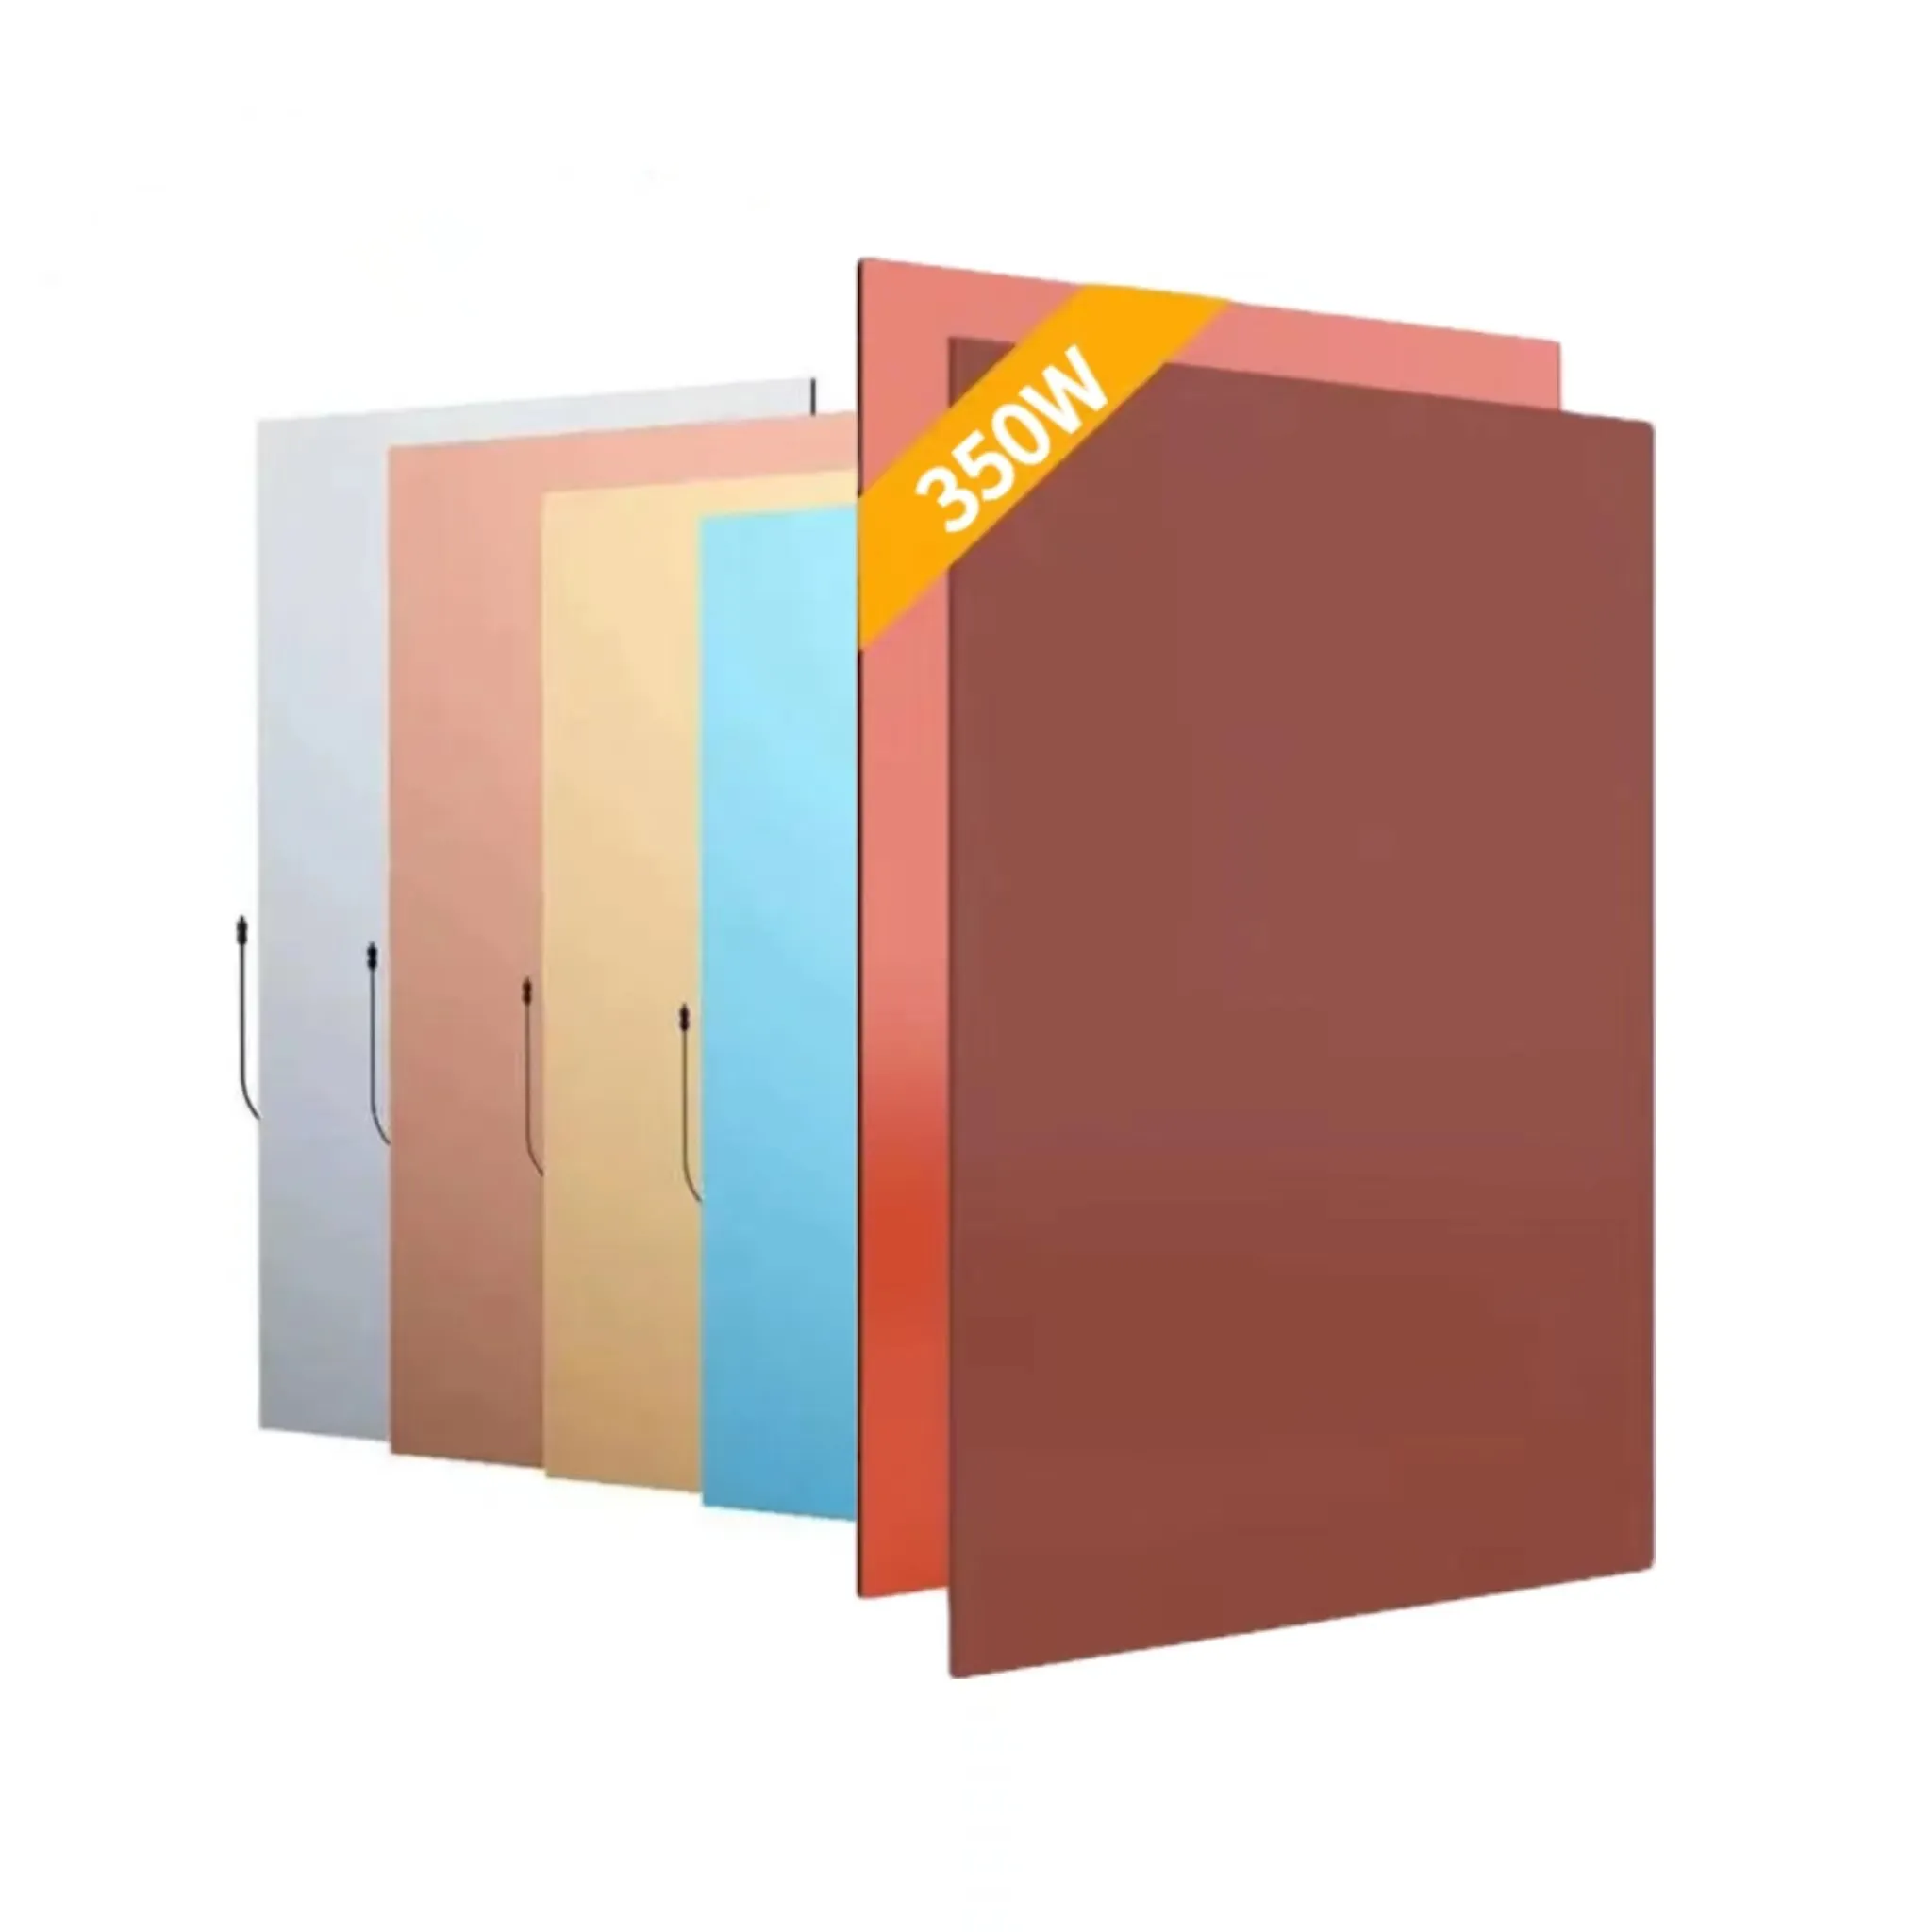 Most popular In China orange color glazed floor tiles 300w 350w 500w Pv Modules With High Quality